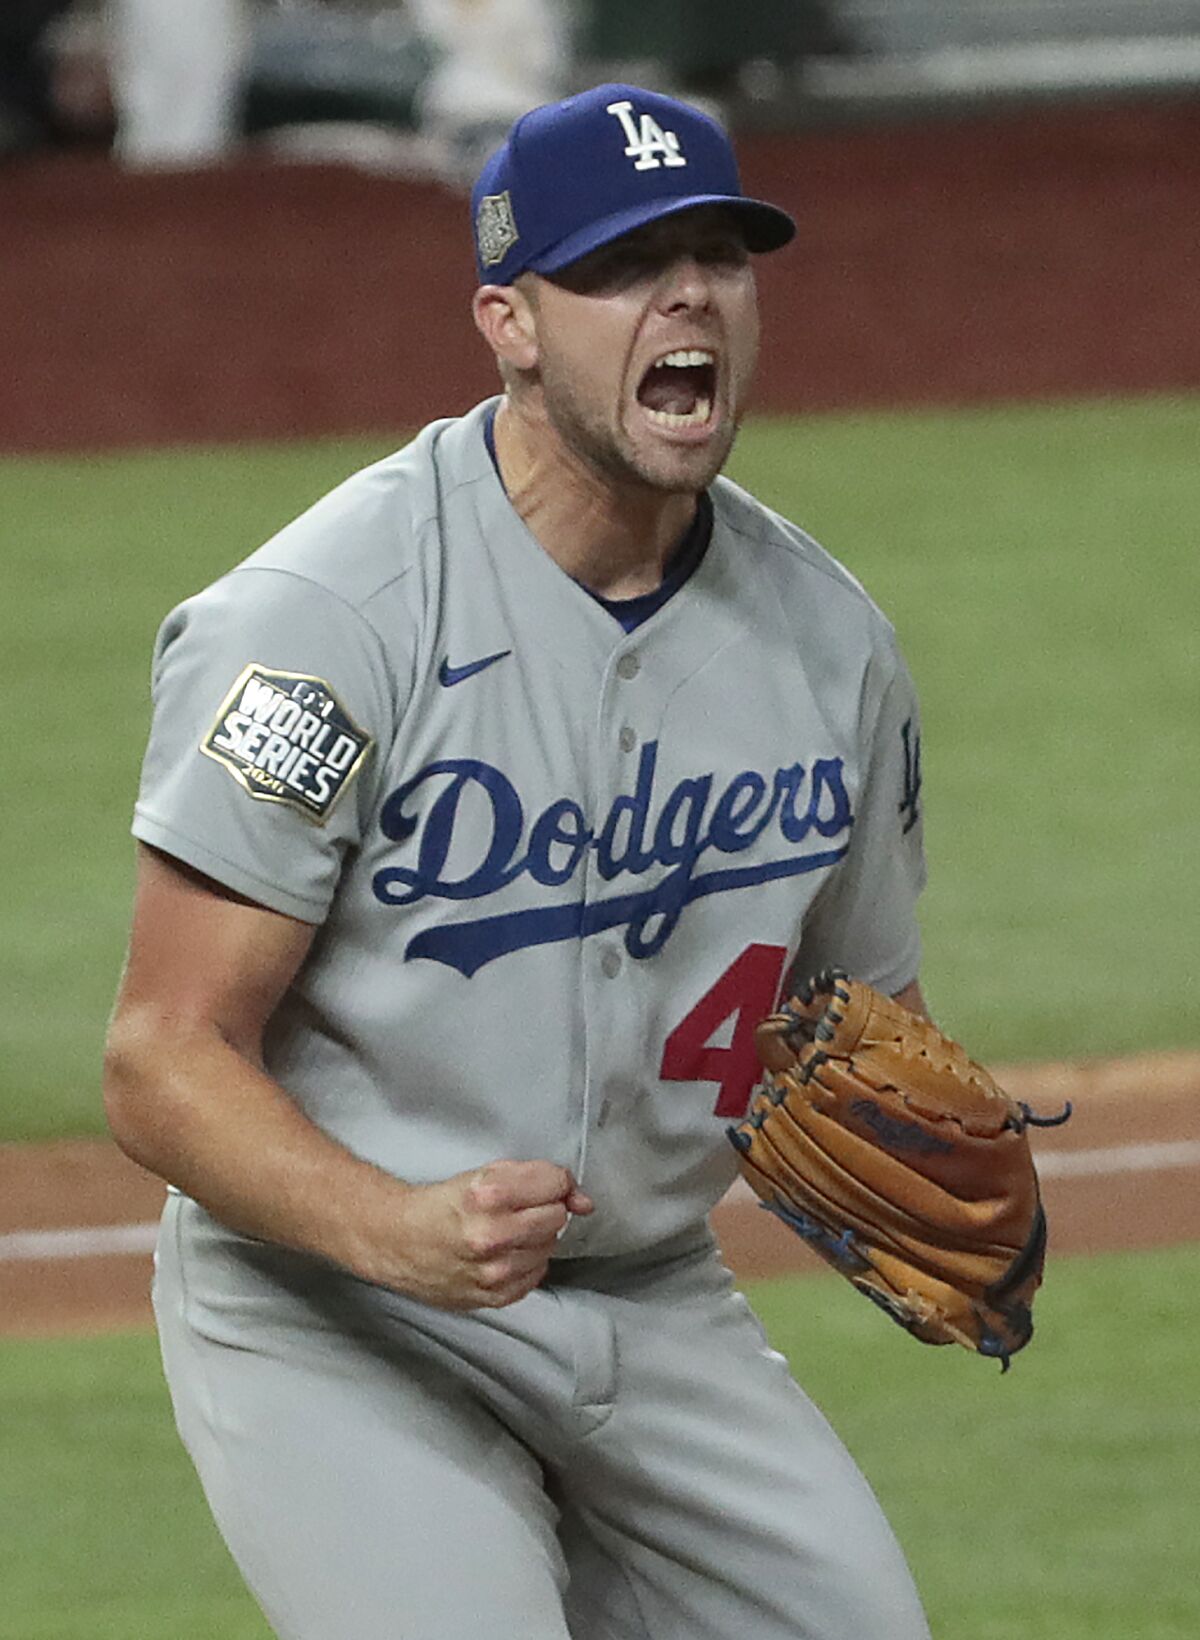 Blake Treinen recorded the save in Game 5 of the 2020 World Series when he shut down the Tampa Bay Rays in a 4-2 victory.